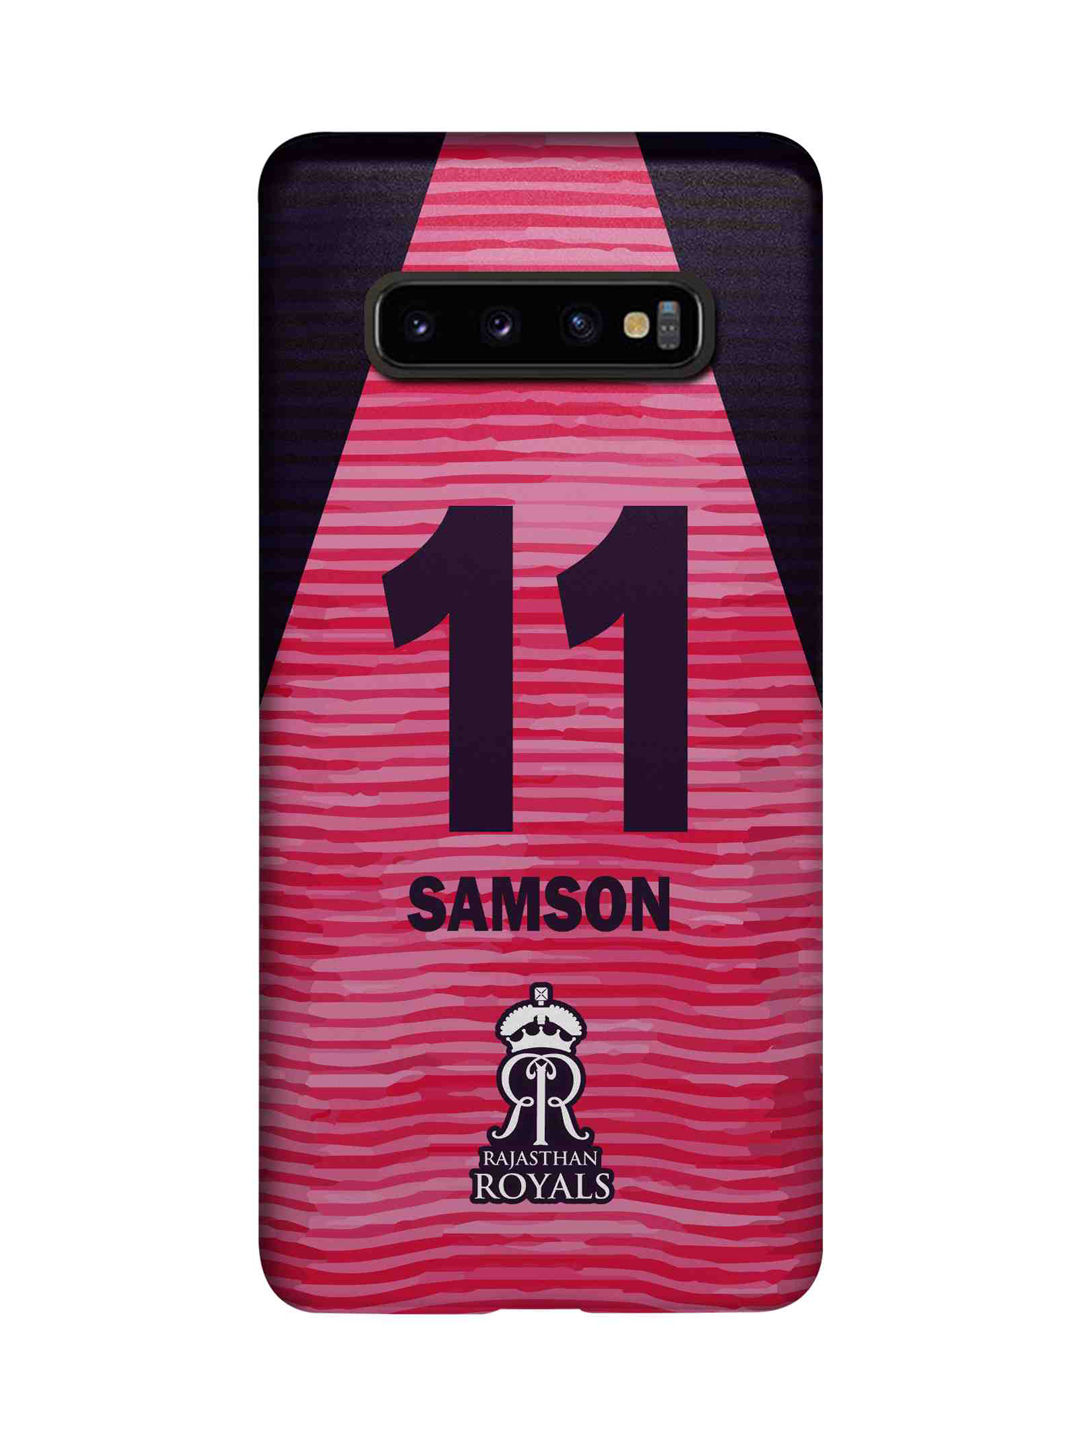 Buy Rajasthan Royals Gear Up - Sleek Case for Samsung S10 Plus Phone Cases & Covers Online